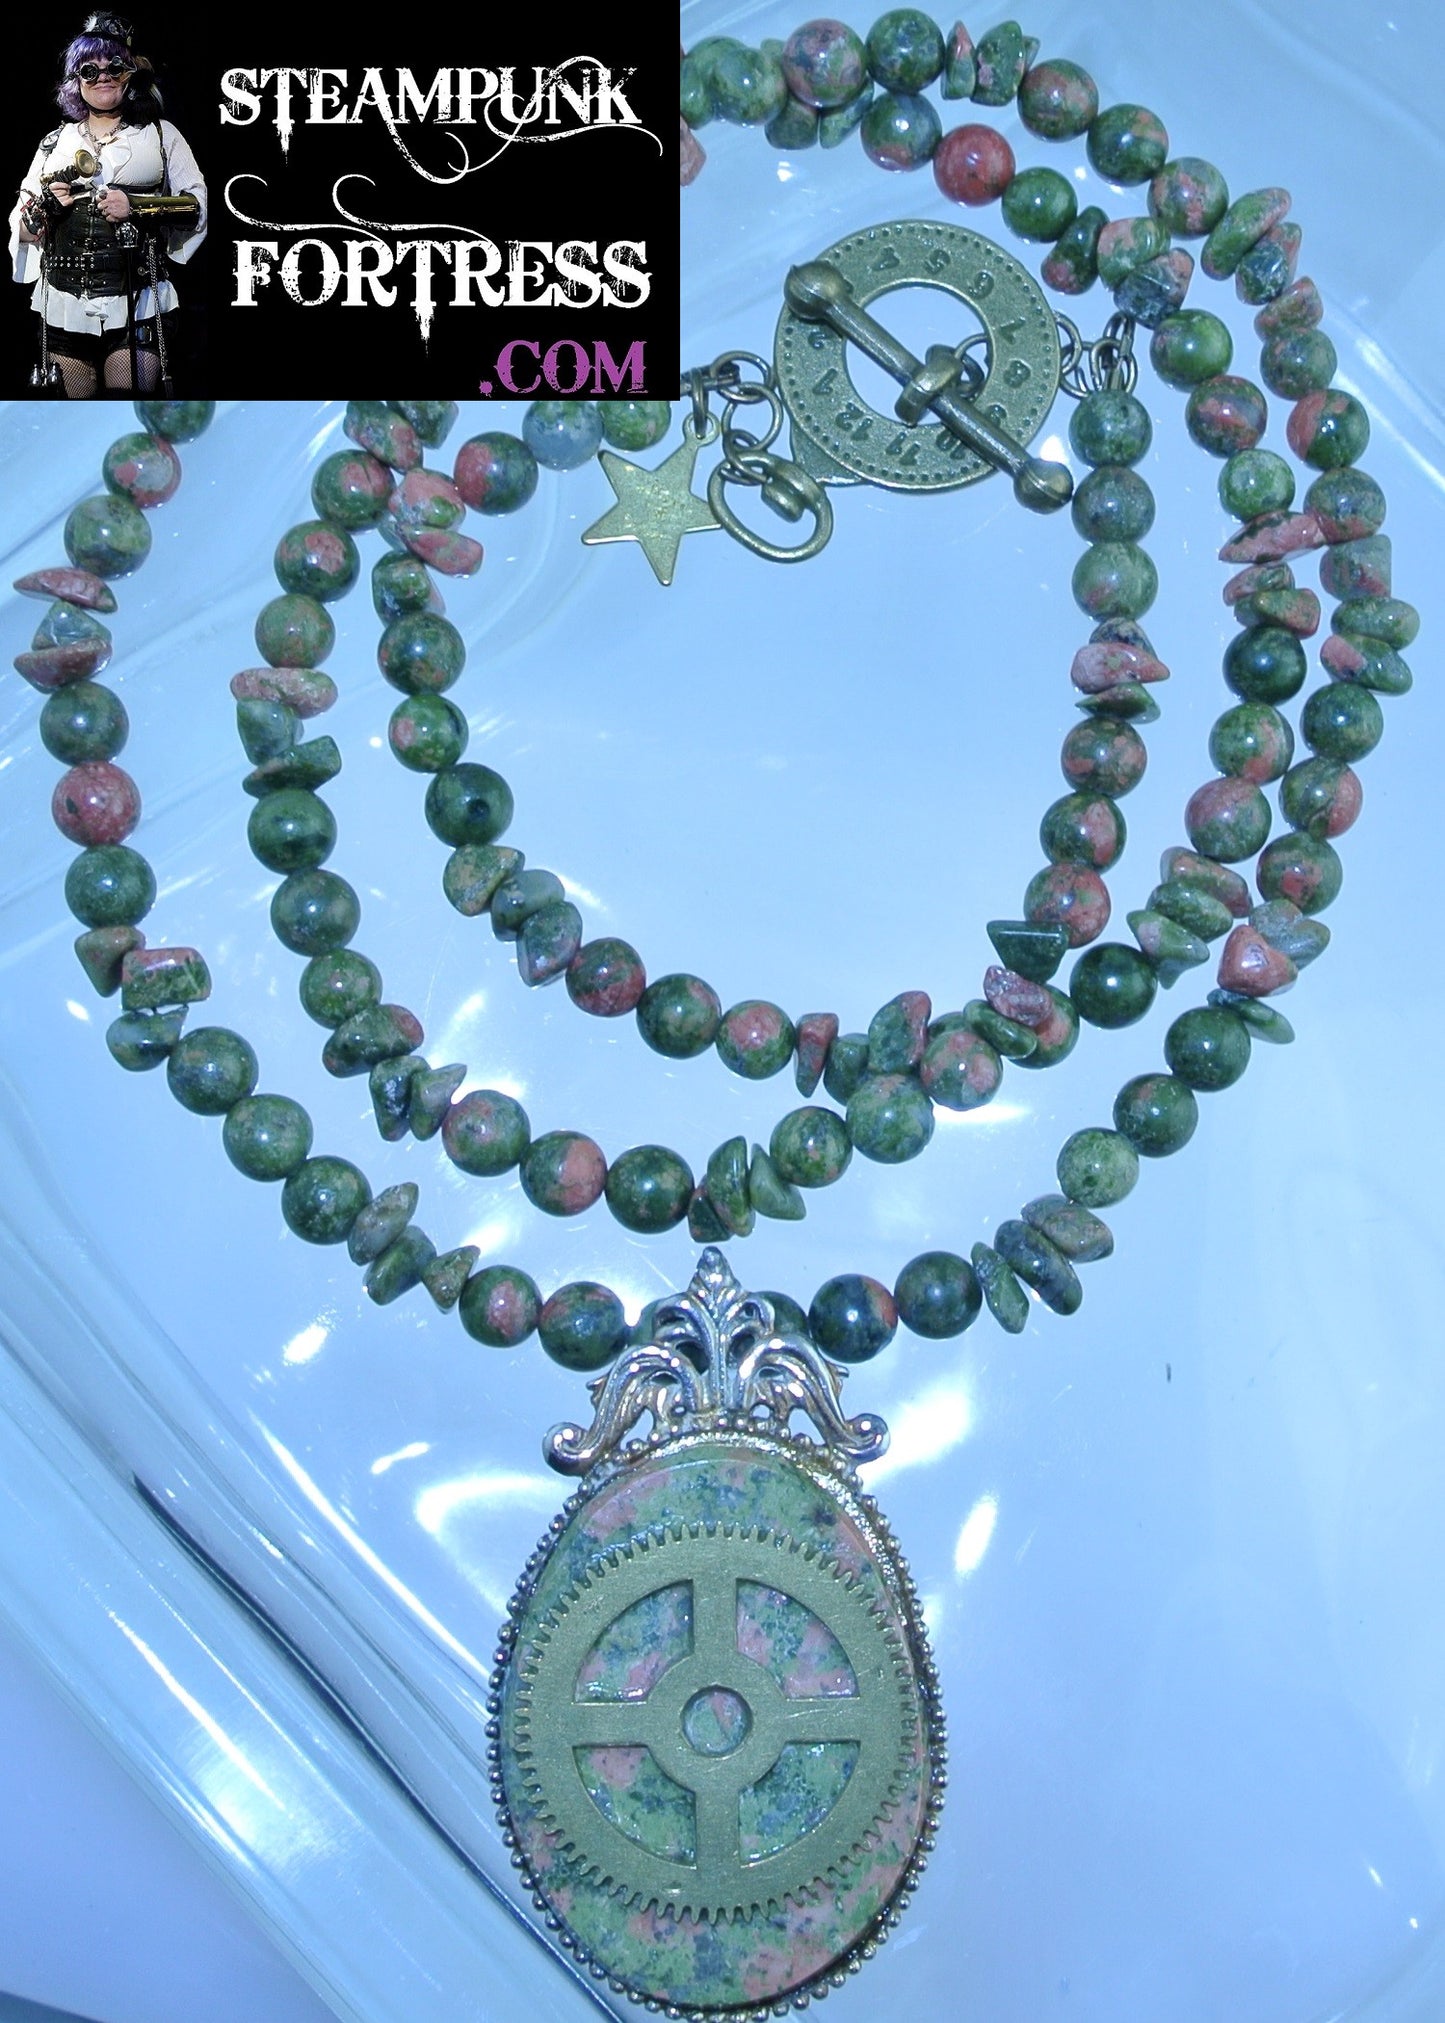 BRASS UNAKITE GEMSTONES STONES FOCAL FLAT BRASS 4 ARM GEAR 3 ROUNDS 3 CHIPS NECKLACE SET AVAILABLE STARR WILDE STEAMPUNK FORTRESS